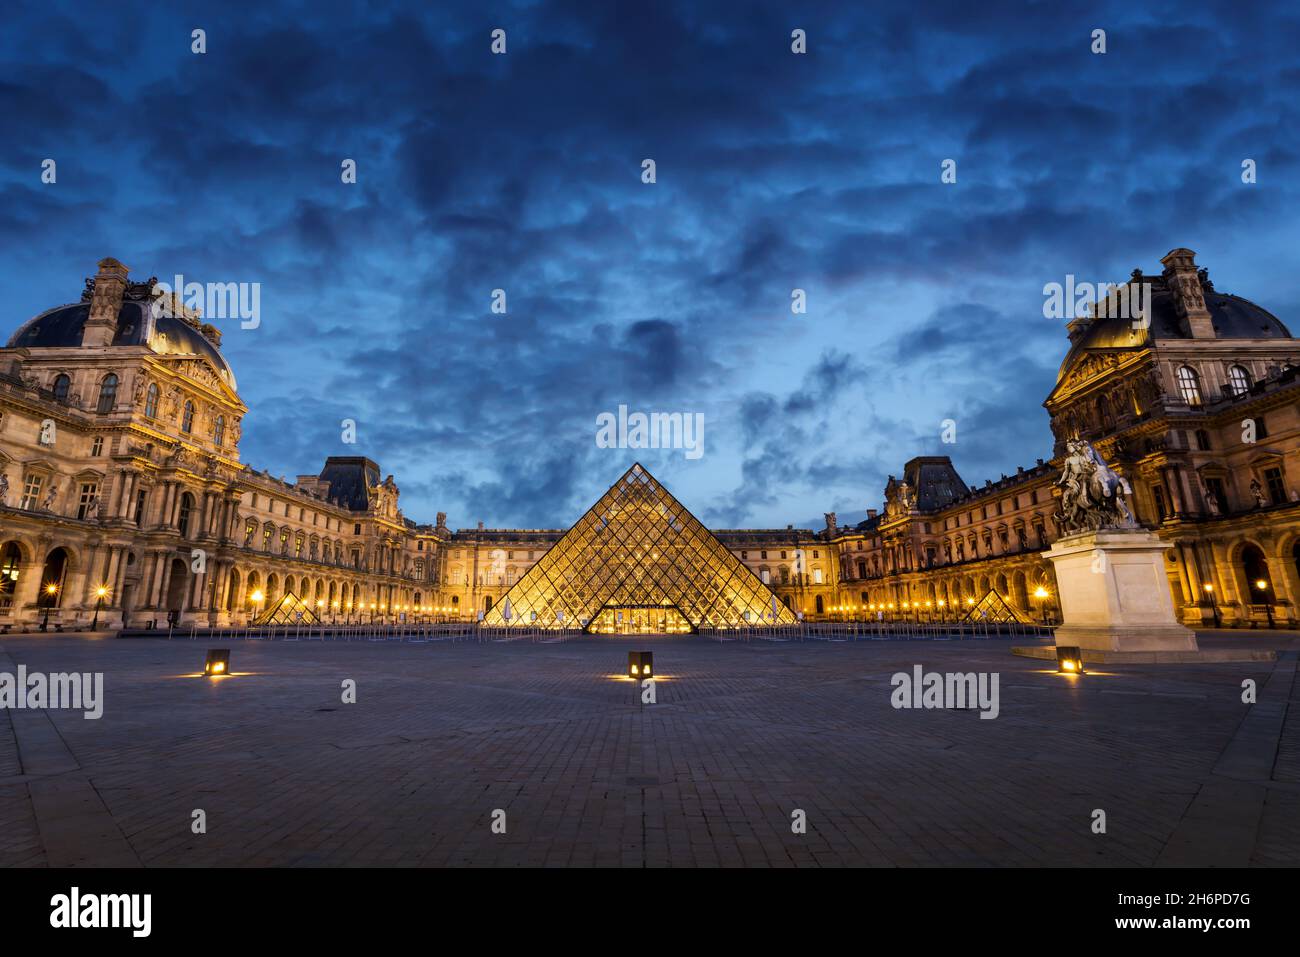 Louvre museum and the pyramid illuminated at night in Paris France Stock Photo